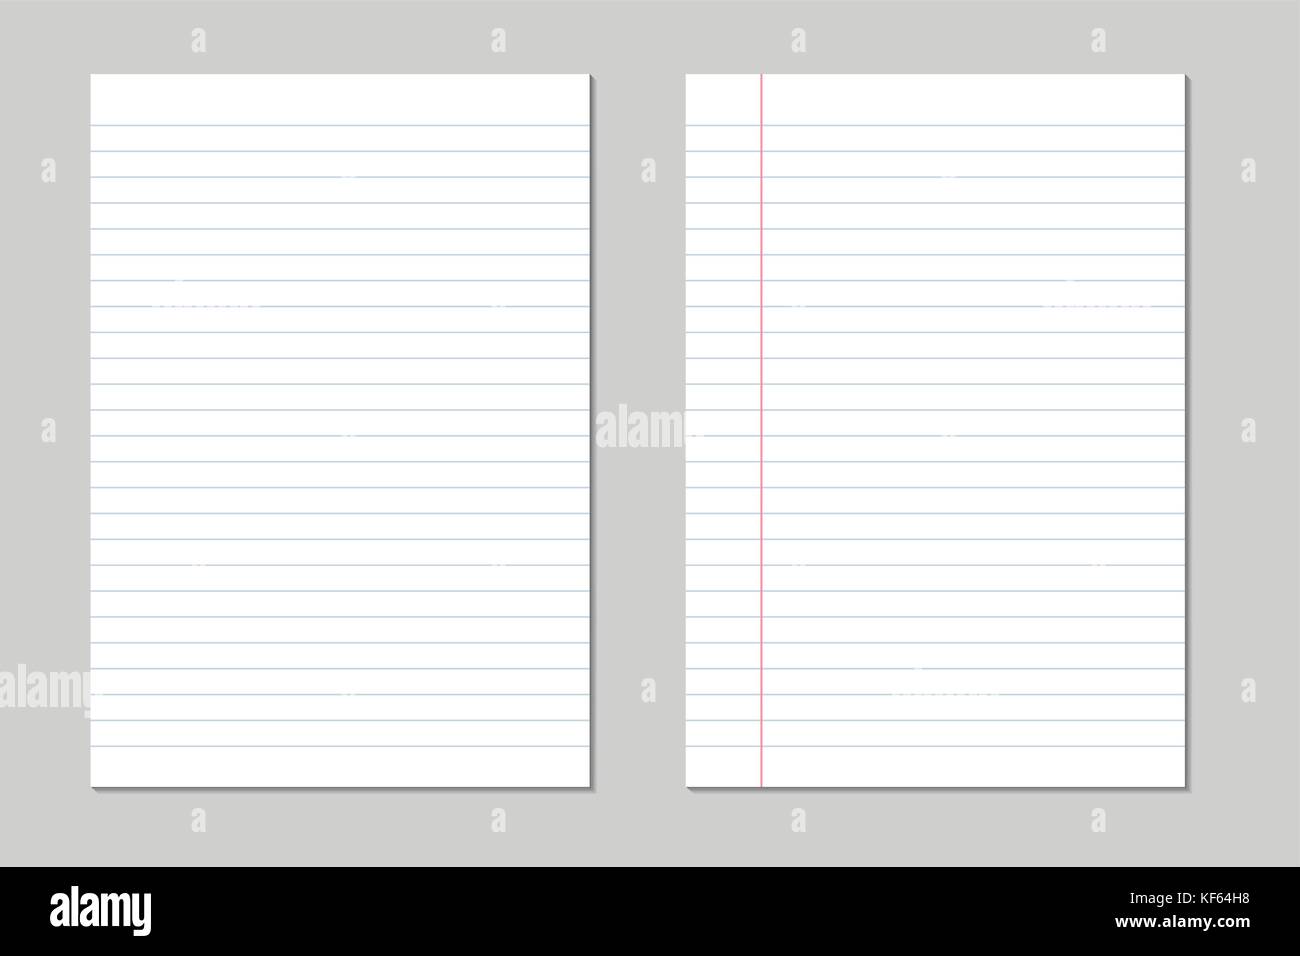 Set of vector sheets of lined paper with border isolated on a gray background Stock Vector